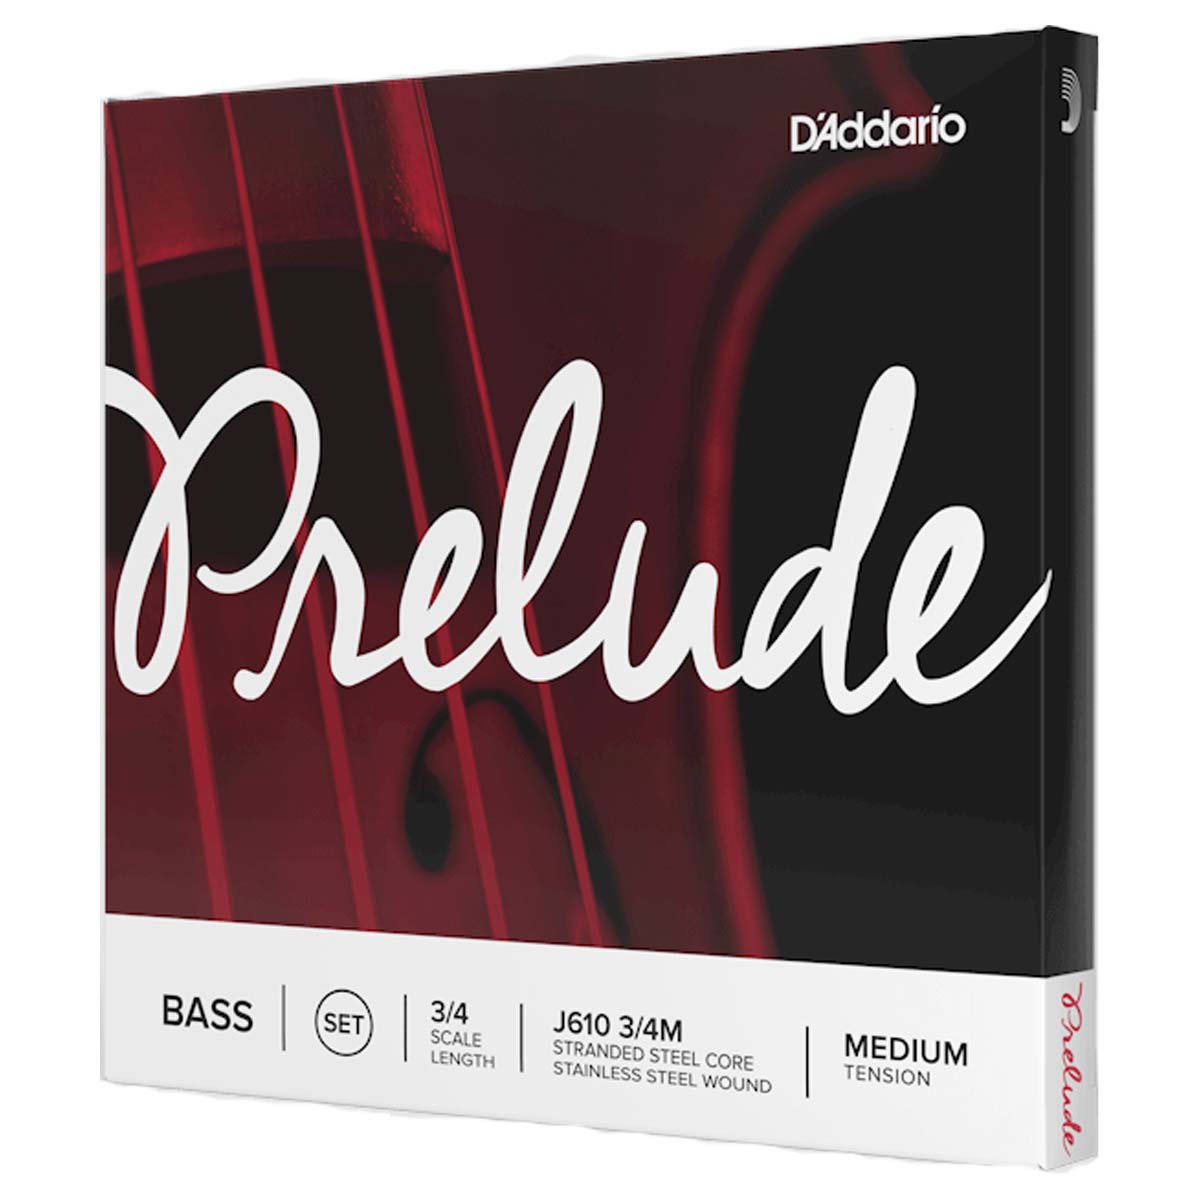 Prelude Medium Tension Upright Bass Strings for 3/4 Size